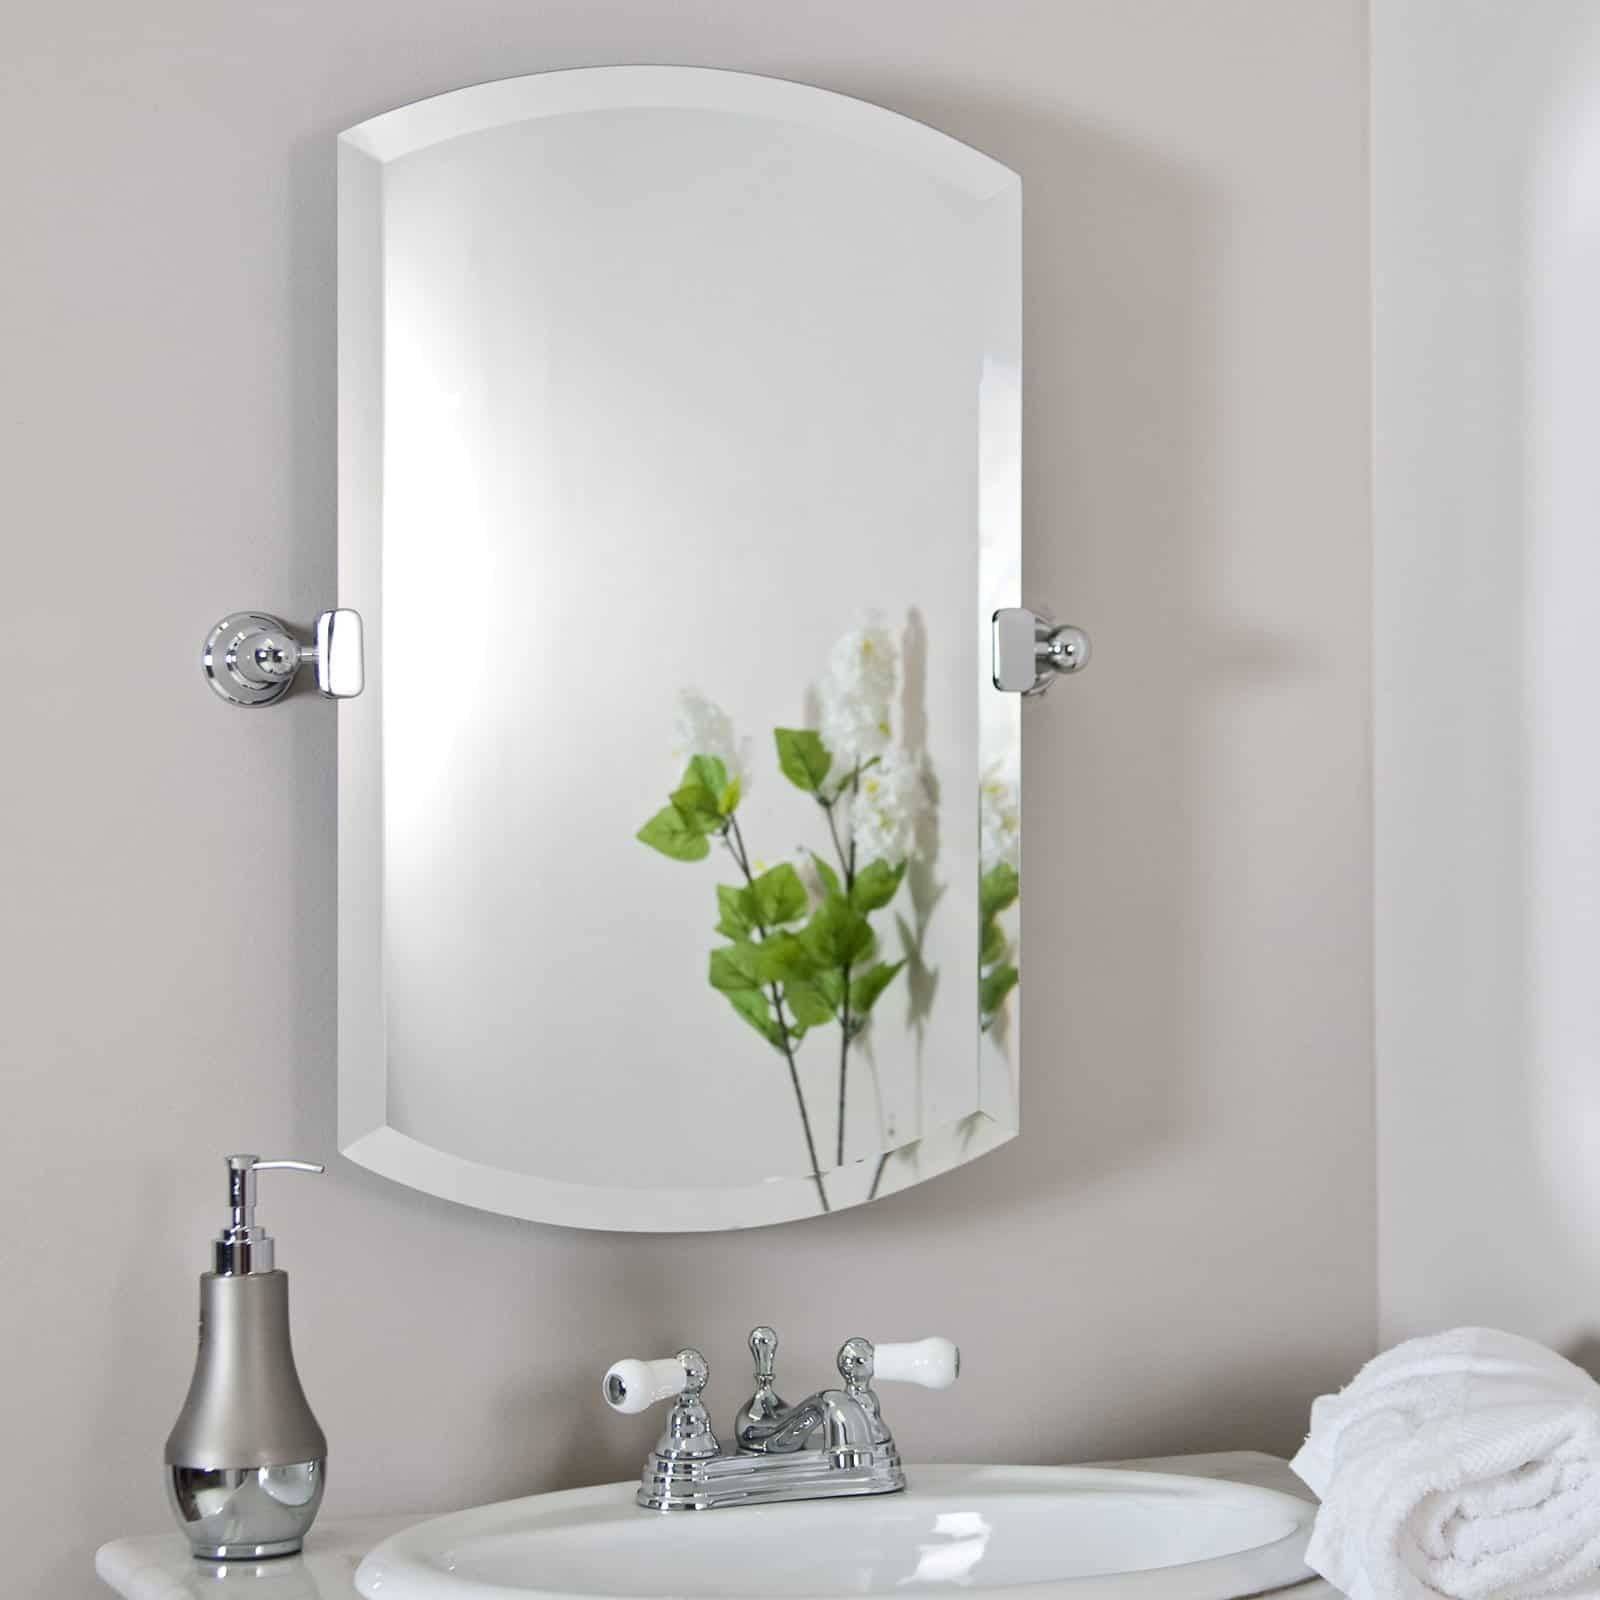 Creative Bathroom Mirror Ideas – Decoration Channel With Vanity Mirrors (View 11 of 15)